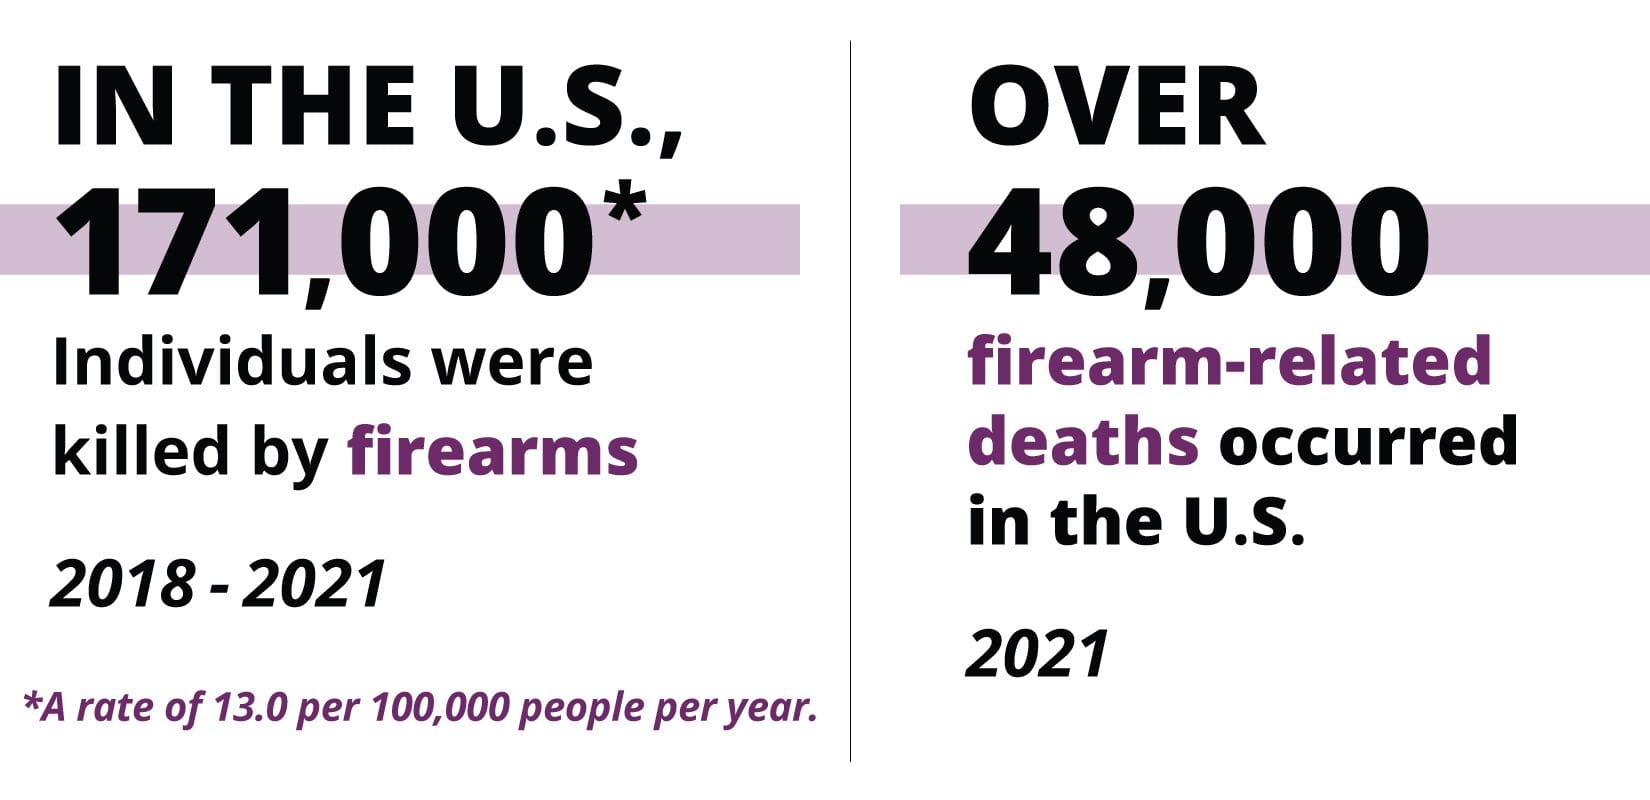 United States' FIREARM STATS: IN THE U.S., 171,000* Individuals were killed by ﬁrearms (2018-2021). *A rate of 13.0 per 100,000 people per year. OVER 48,000 ﬁrearm-related deaths occurred in the U.S. (2021). Source: CDC Wonder.